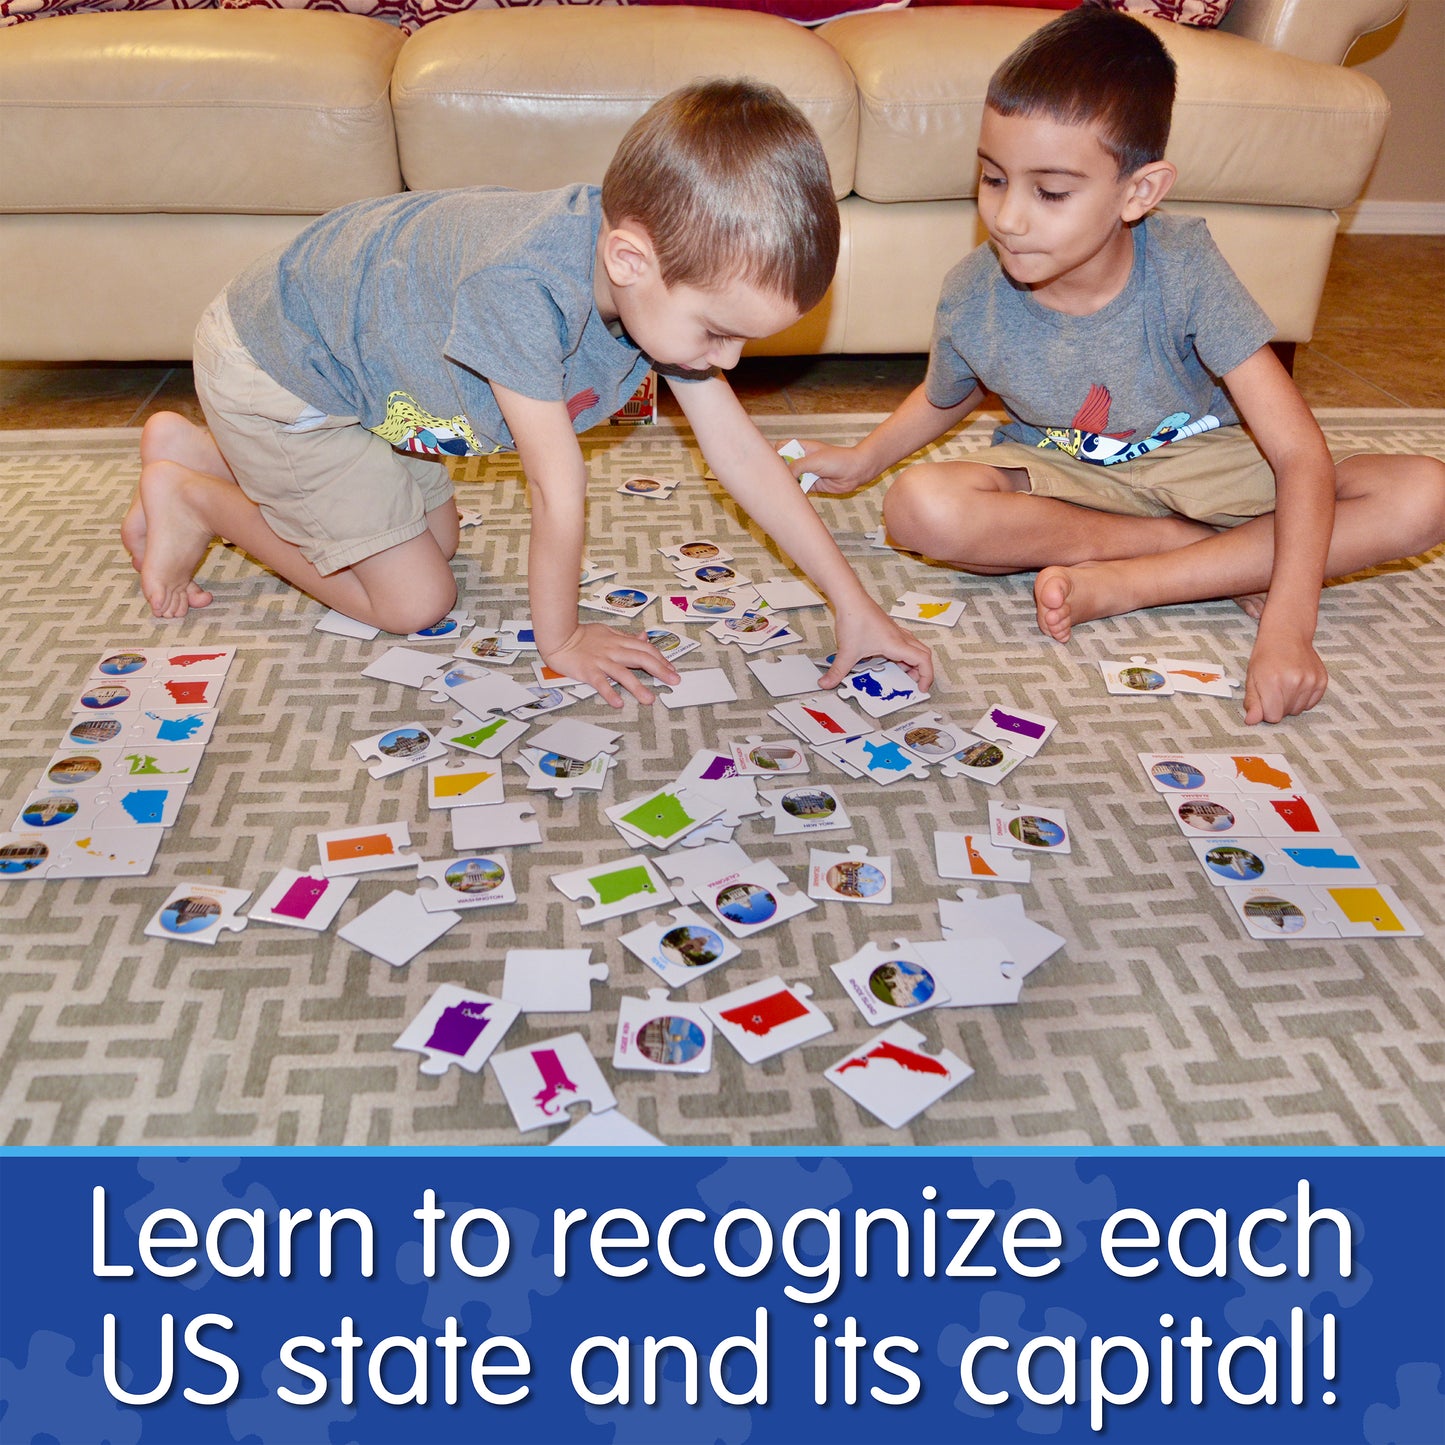 Infographic two young boys playing Match It - States and Capitals that says, "Learn to recognize each US state and its capital!"